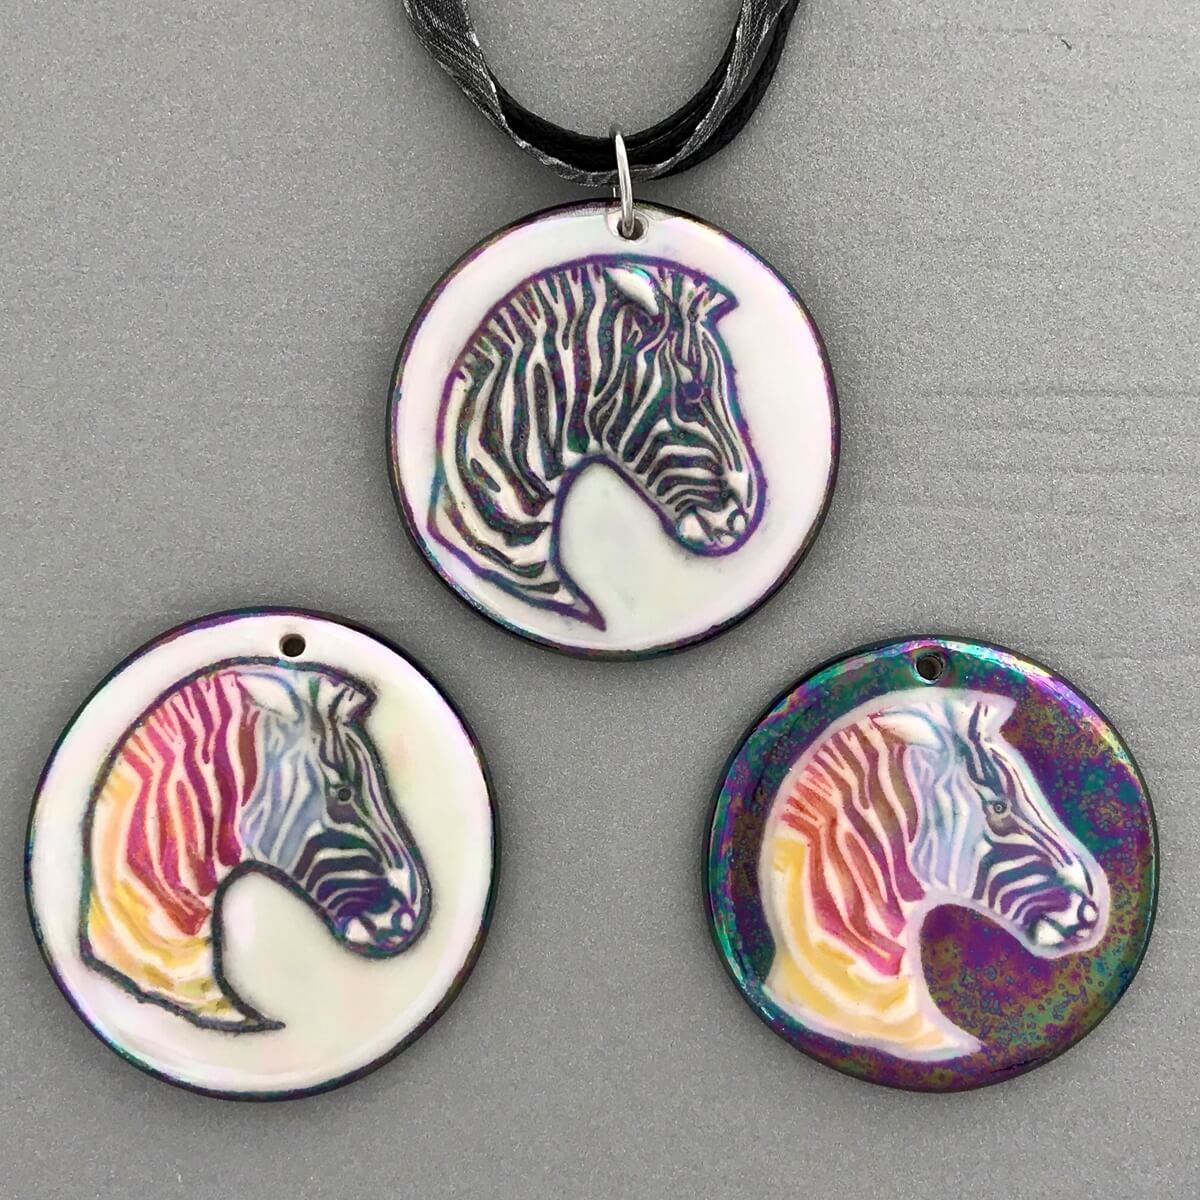 New zebra pictorial pendants, traditional coloring and rainbow with opalescent or black rainbow backgrounds.